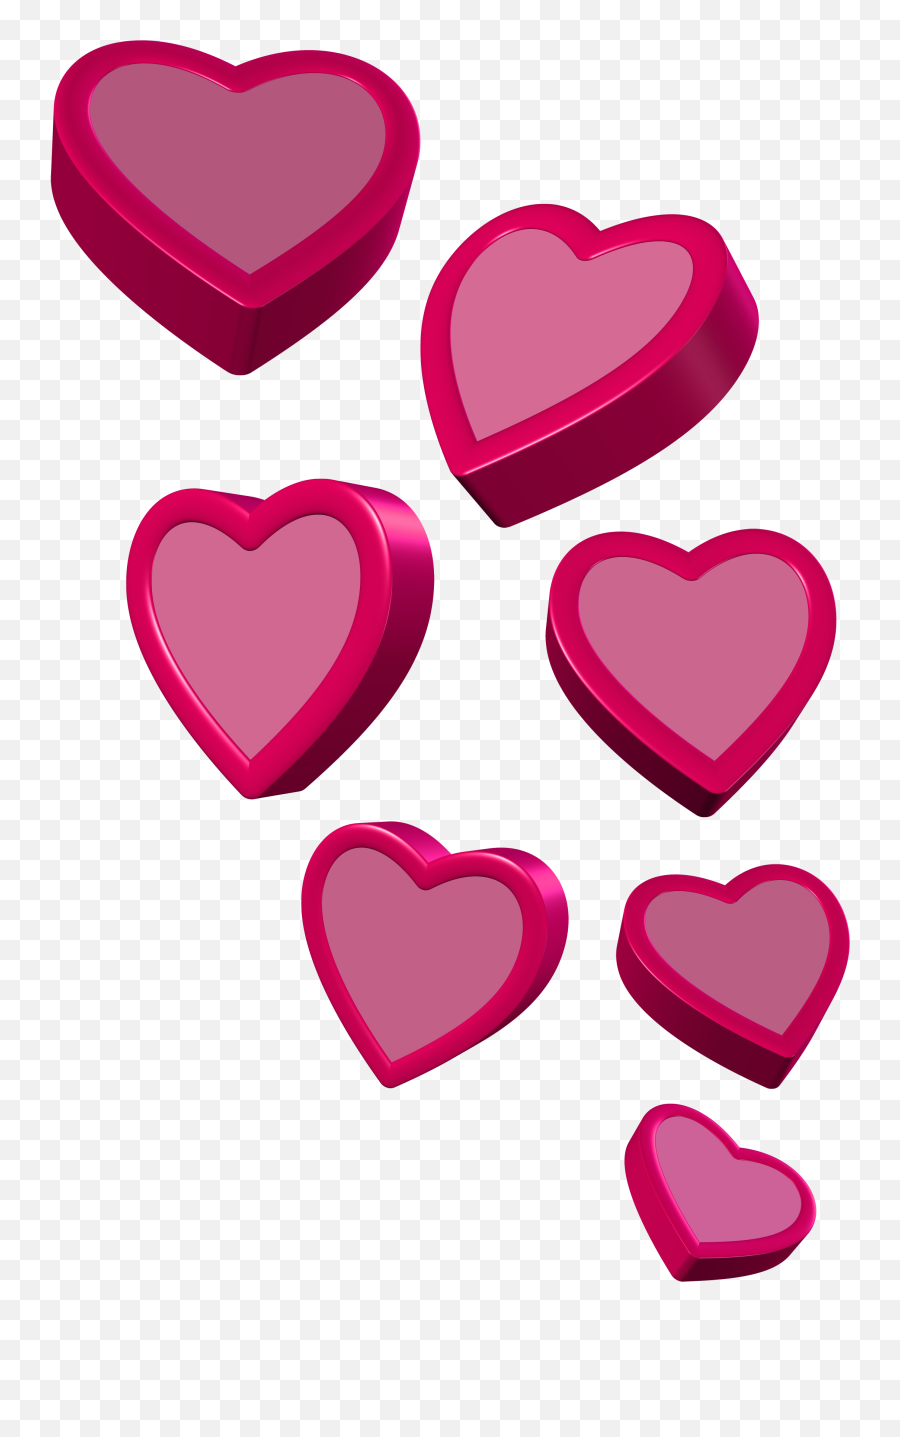 Free Pink Heart Png Download Free Clip Art Free Clip Art - 7 Hearts Clipart Emoji,Pink Heart Emoji Snapchat